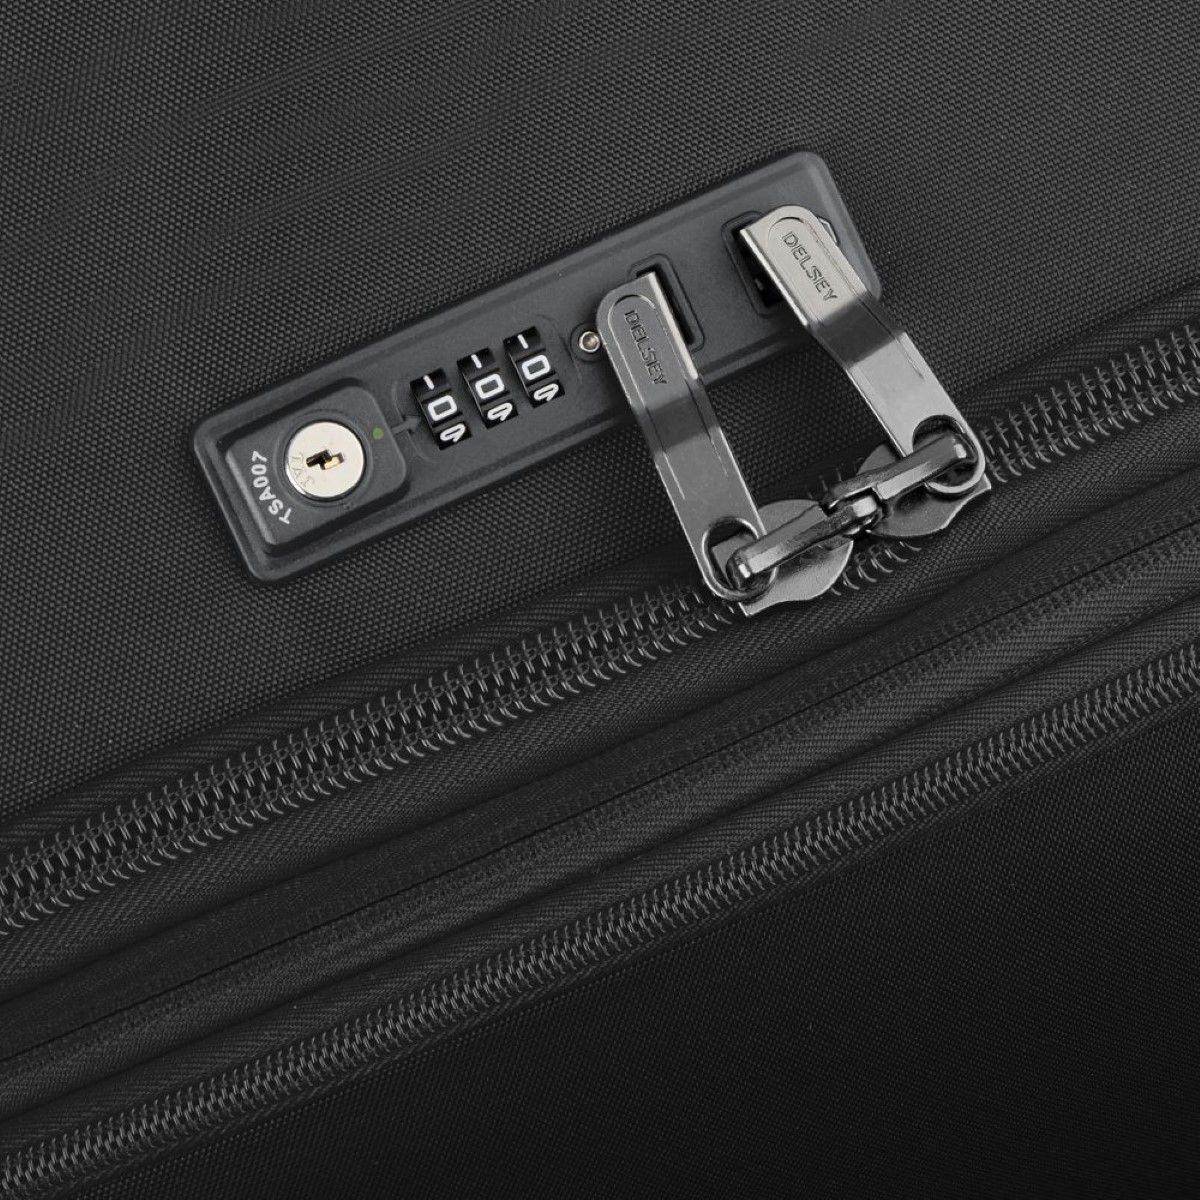 Expandable Slim Cabin Case Mercure 55 cm Delsey, hand luggage in light and durable fabric, with zipped compartment, front pocket, side handle, two silent wheels, TSA combination lock, and double tube telescopic handle.